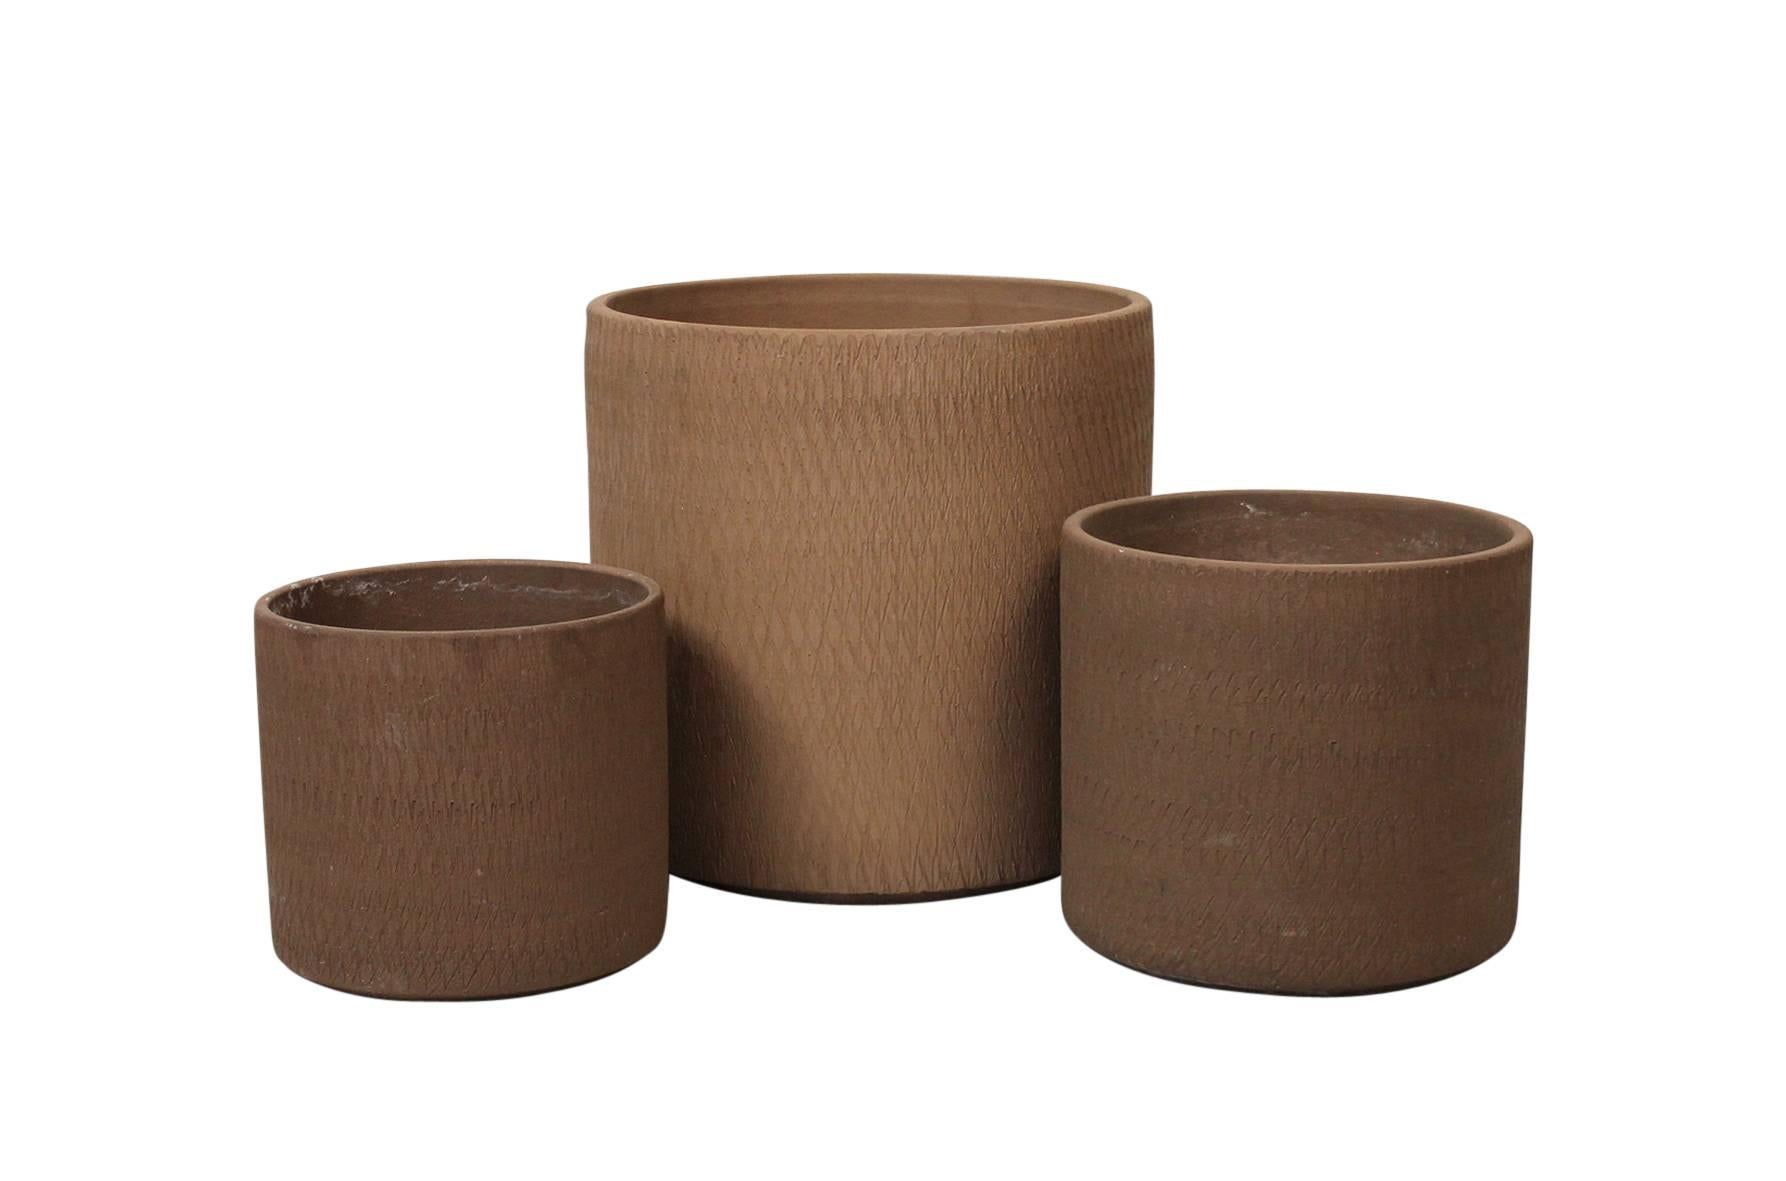 Trio of large architectural pottery planters by Gainey. Thick walled pots with a carved striated or 